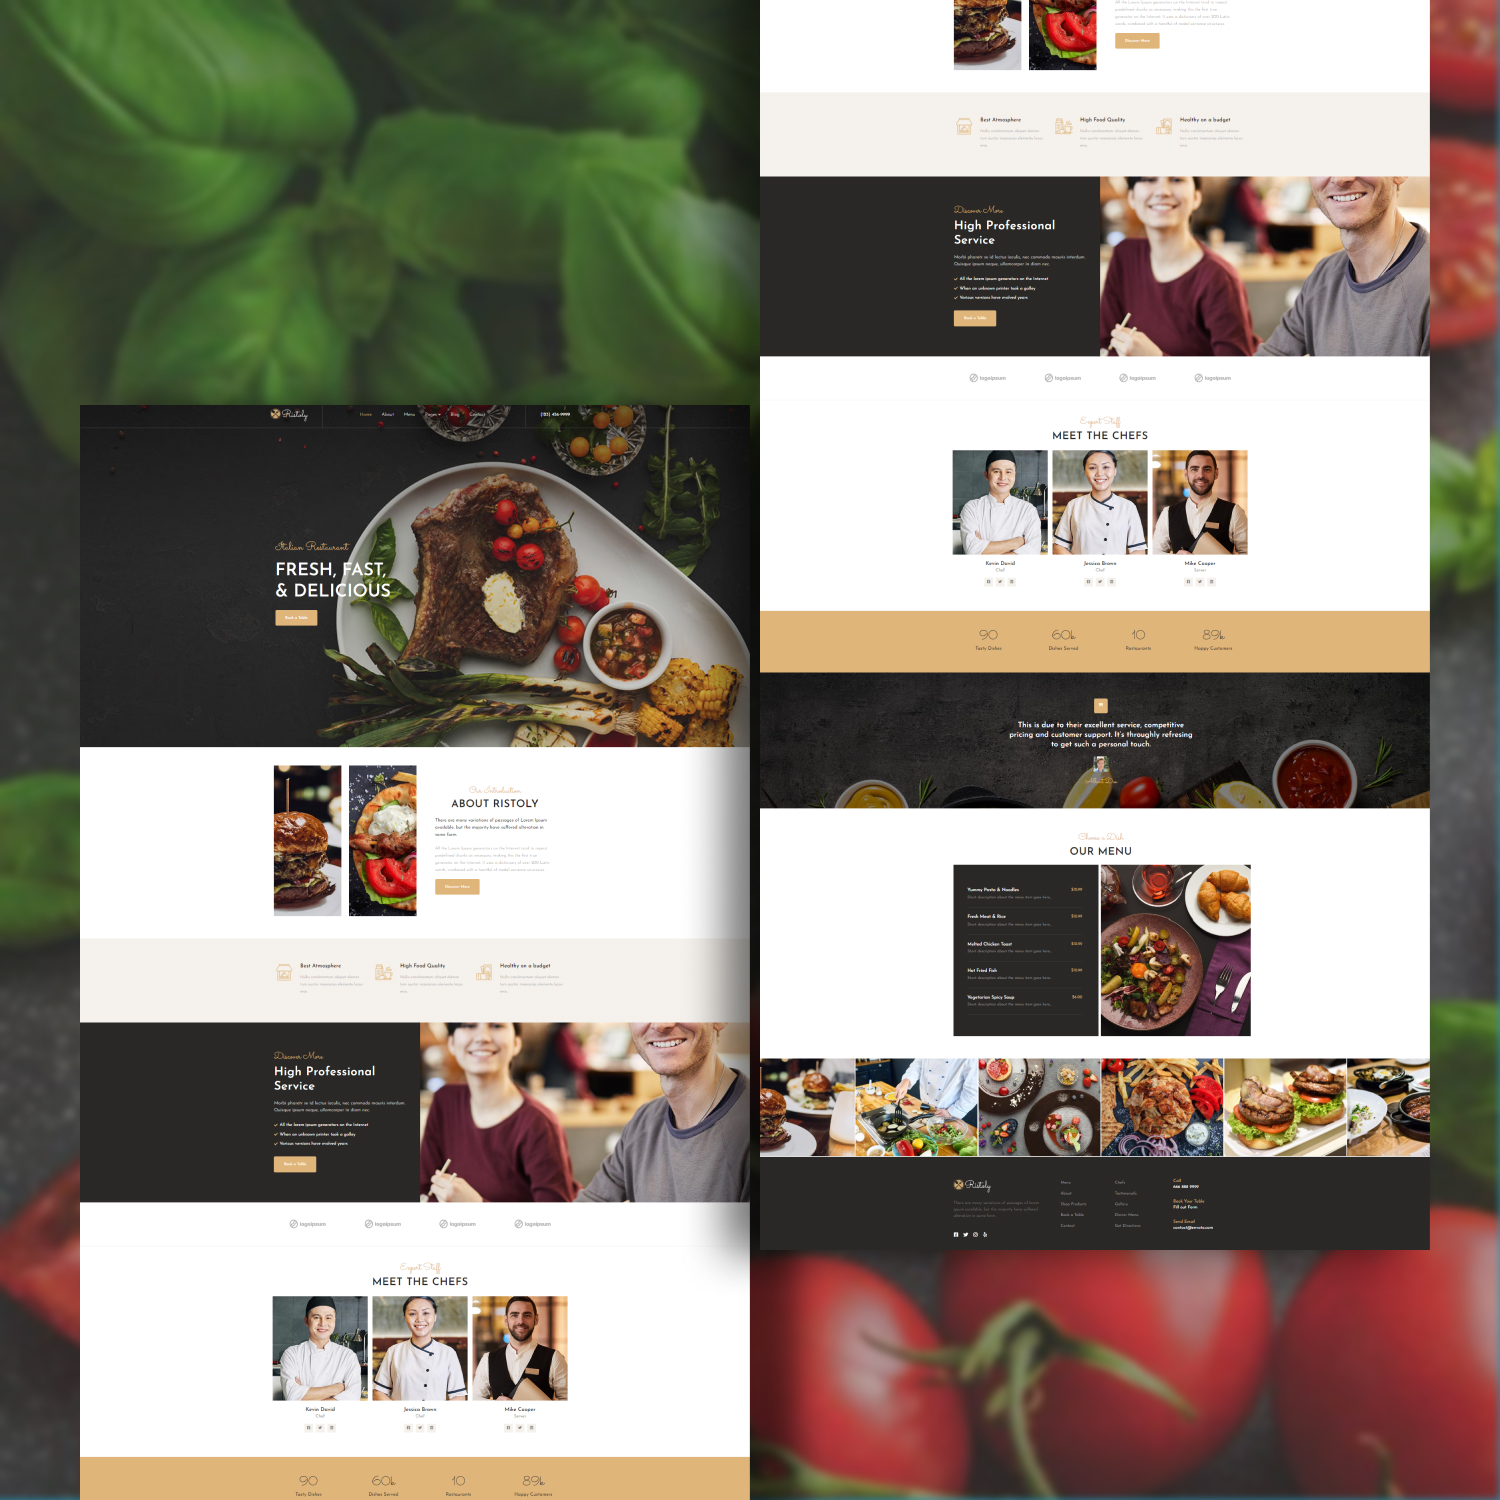 Images with ristoly restaurant wordpress theme.